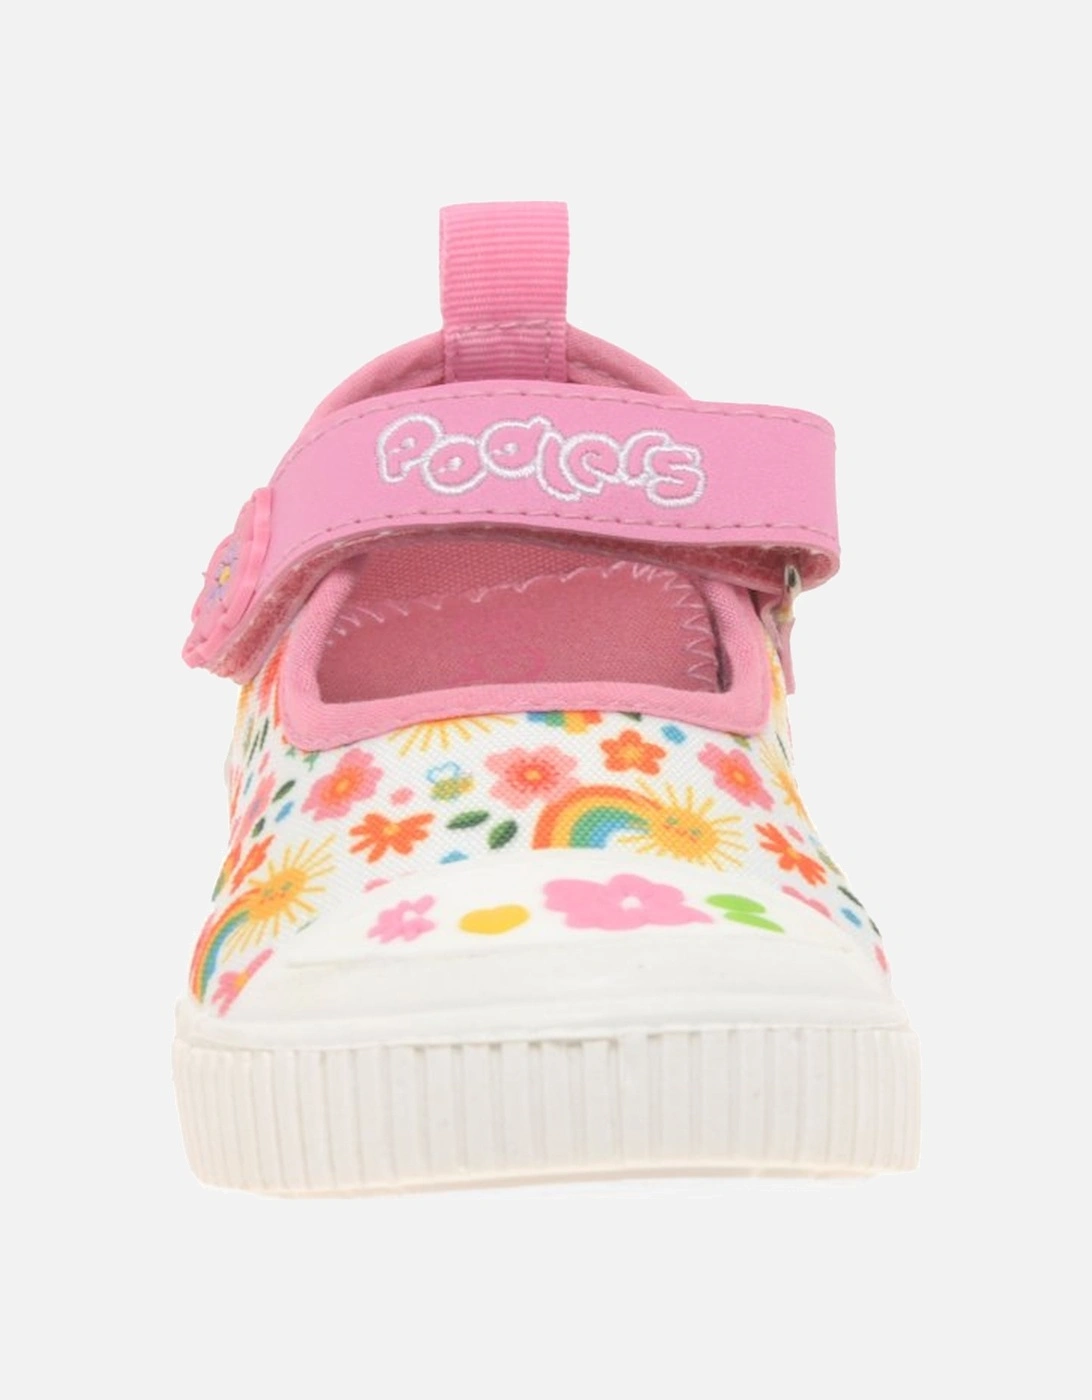 Halle Mary Jane Girls Infant Canvas Shoes